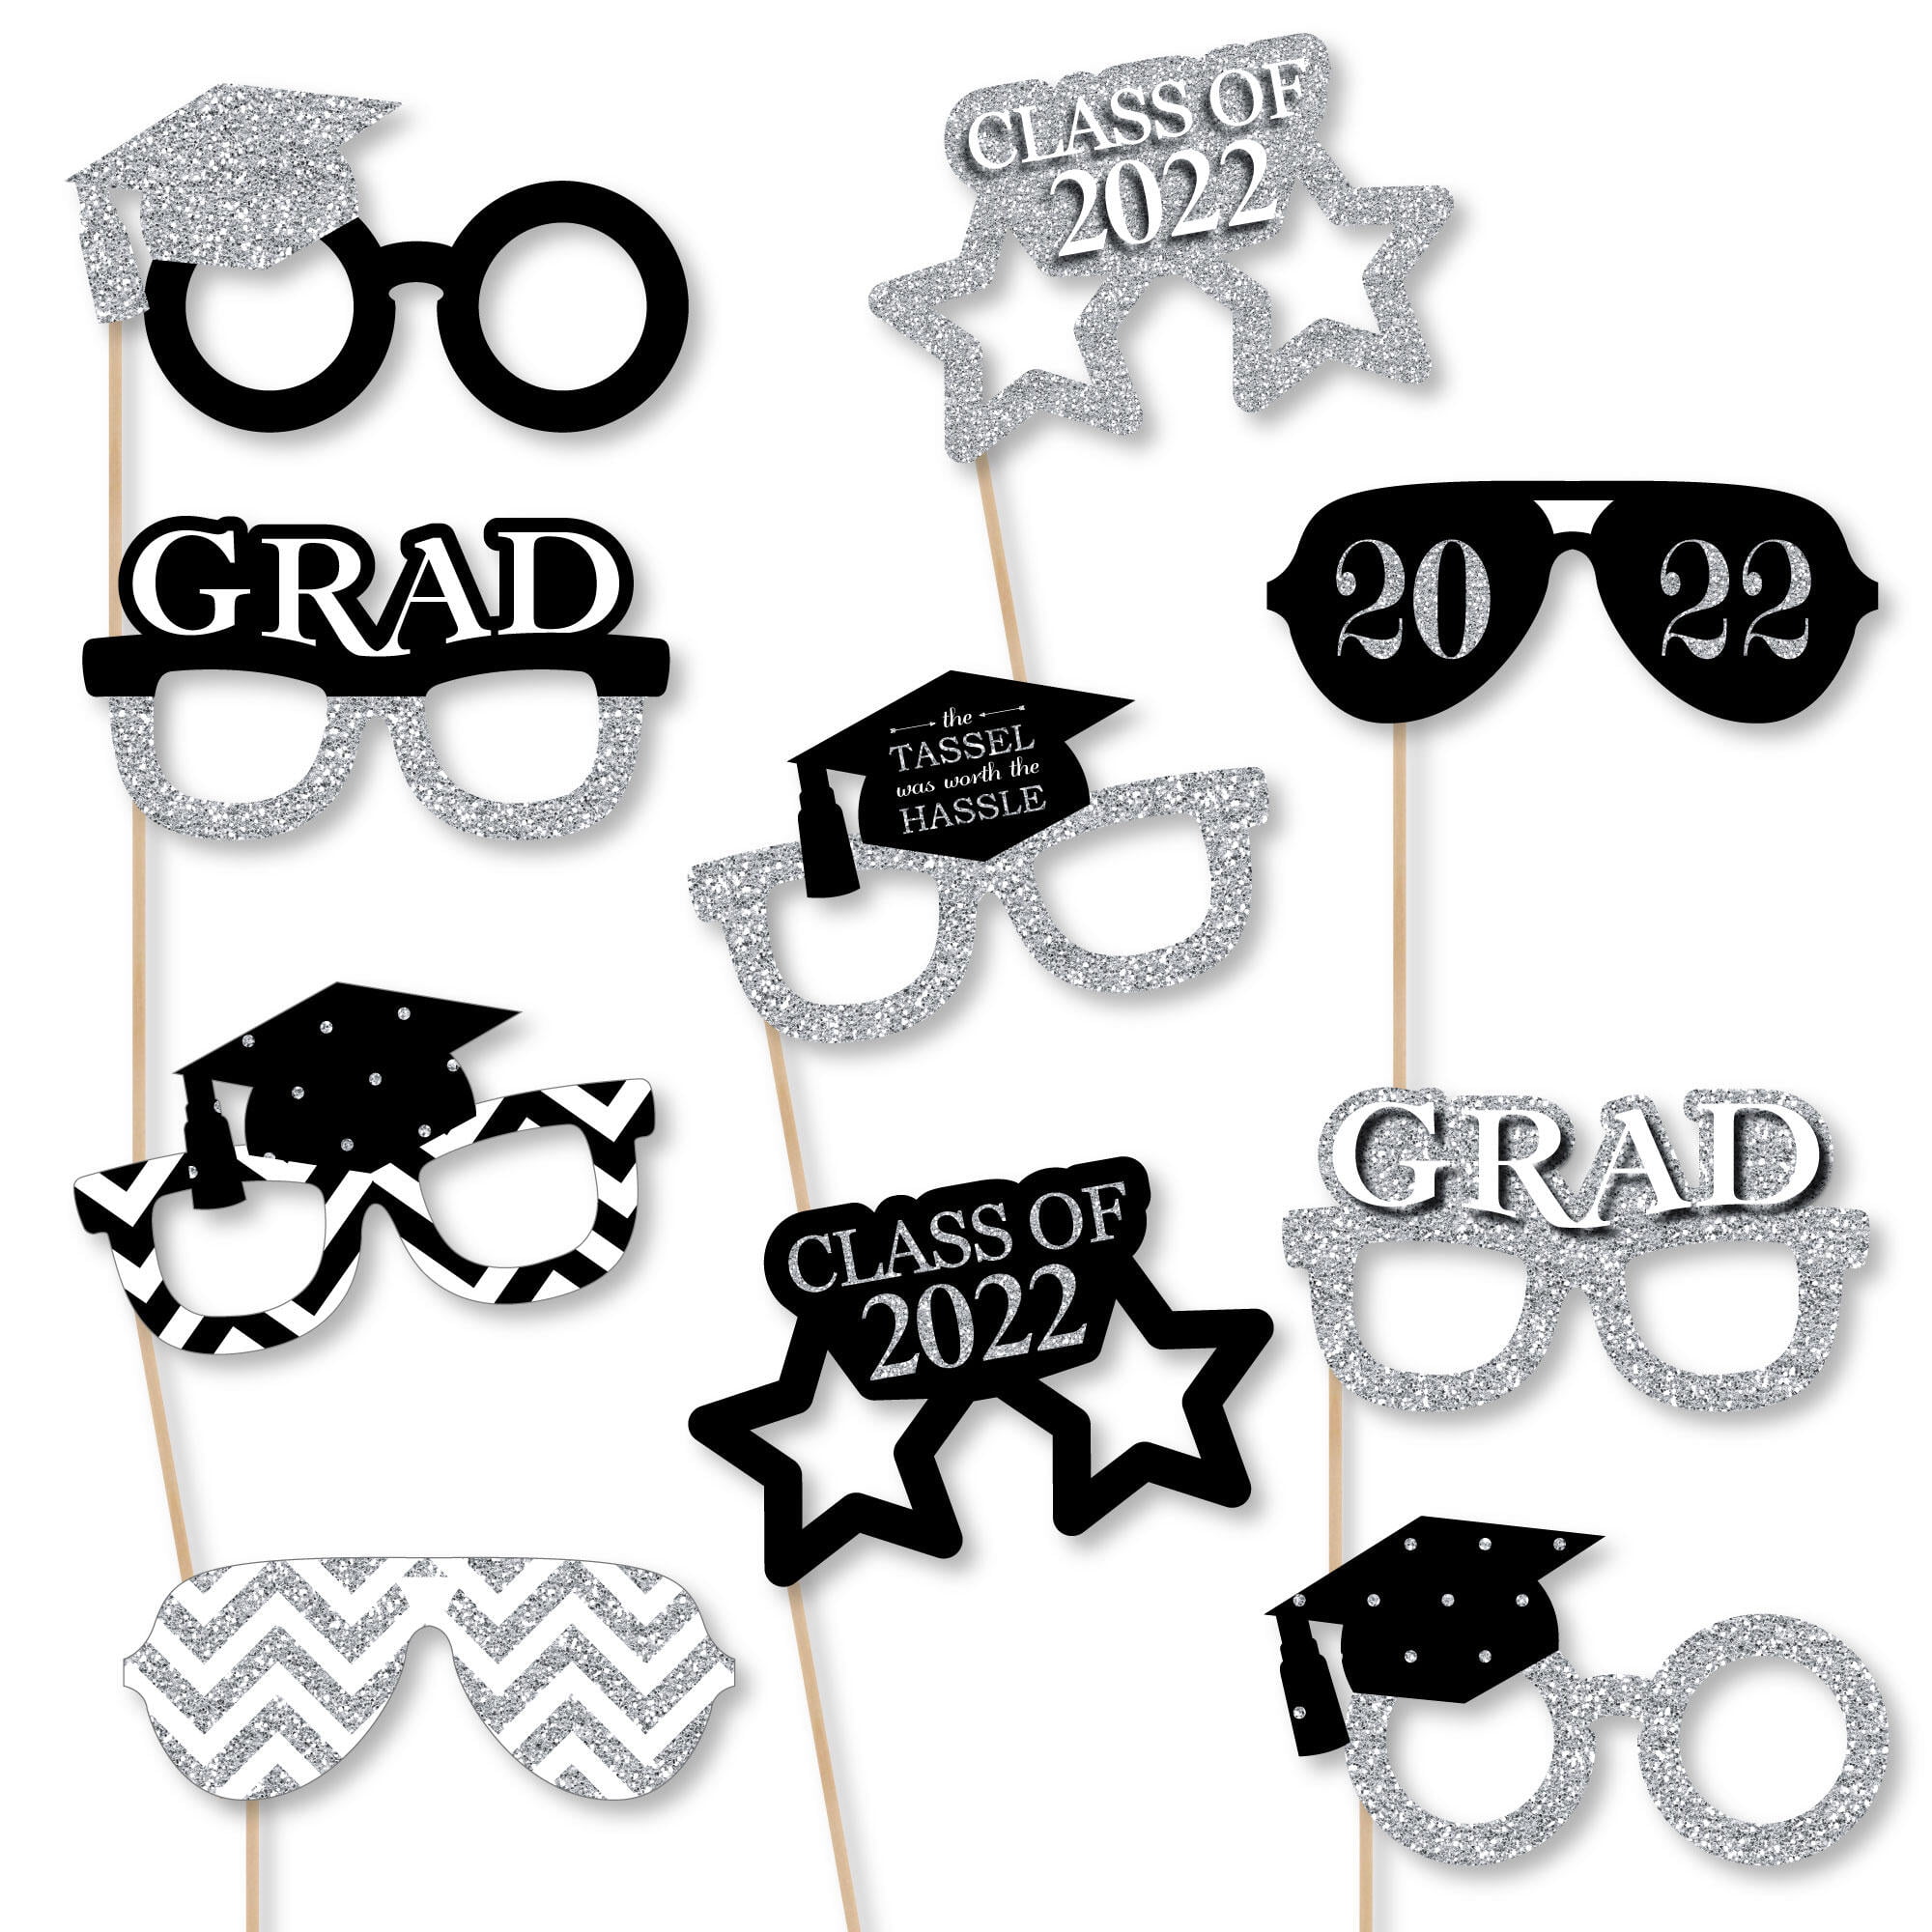 OULII 17pcs Graduation Party Phtoto Booth Props Graduation Banner IM DONE Graduation Party Decorations 